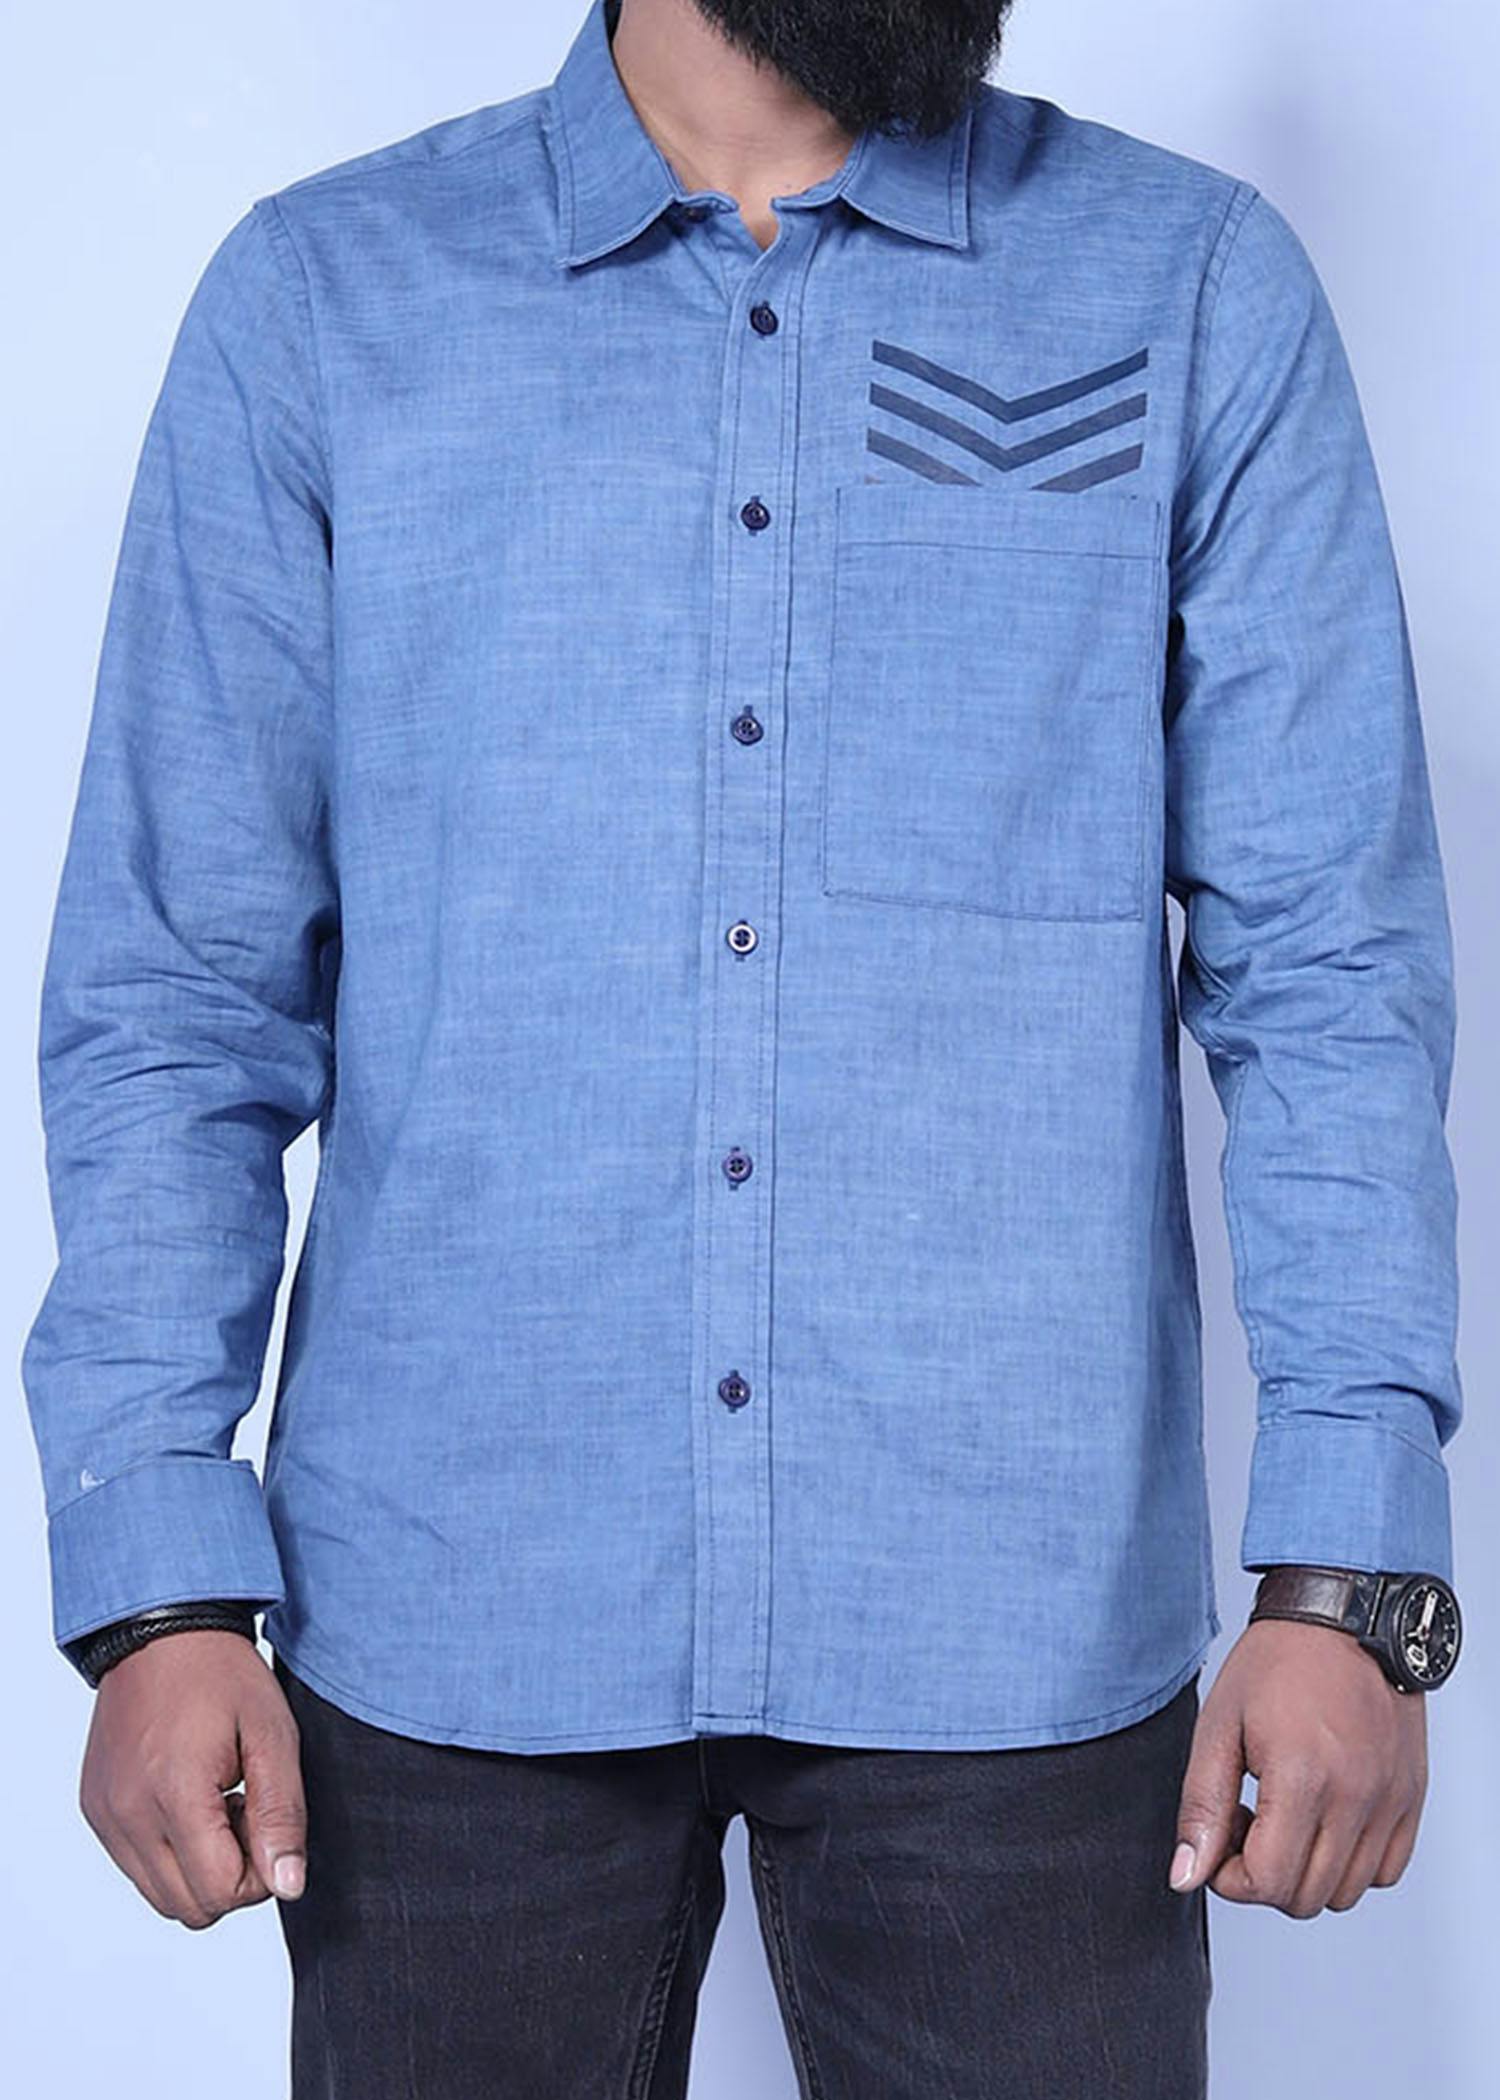 istanbul x ls shirt washed blue color facecropped